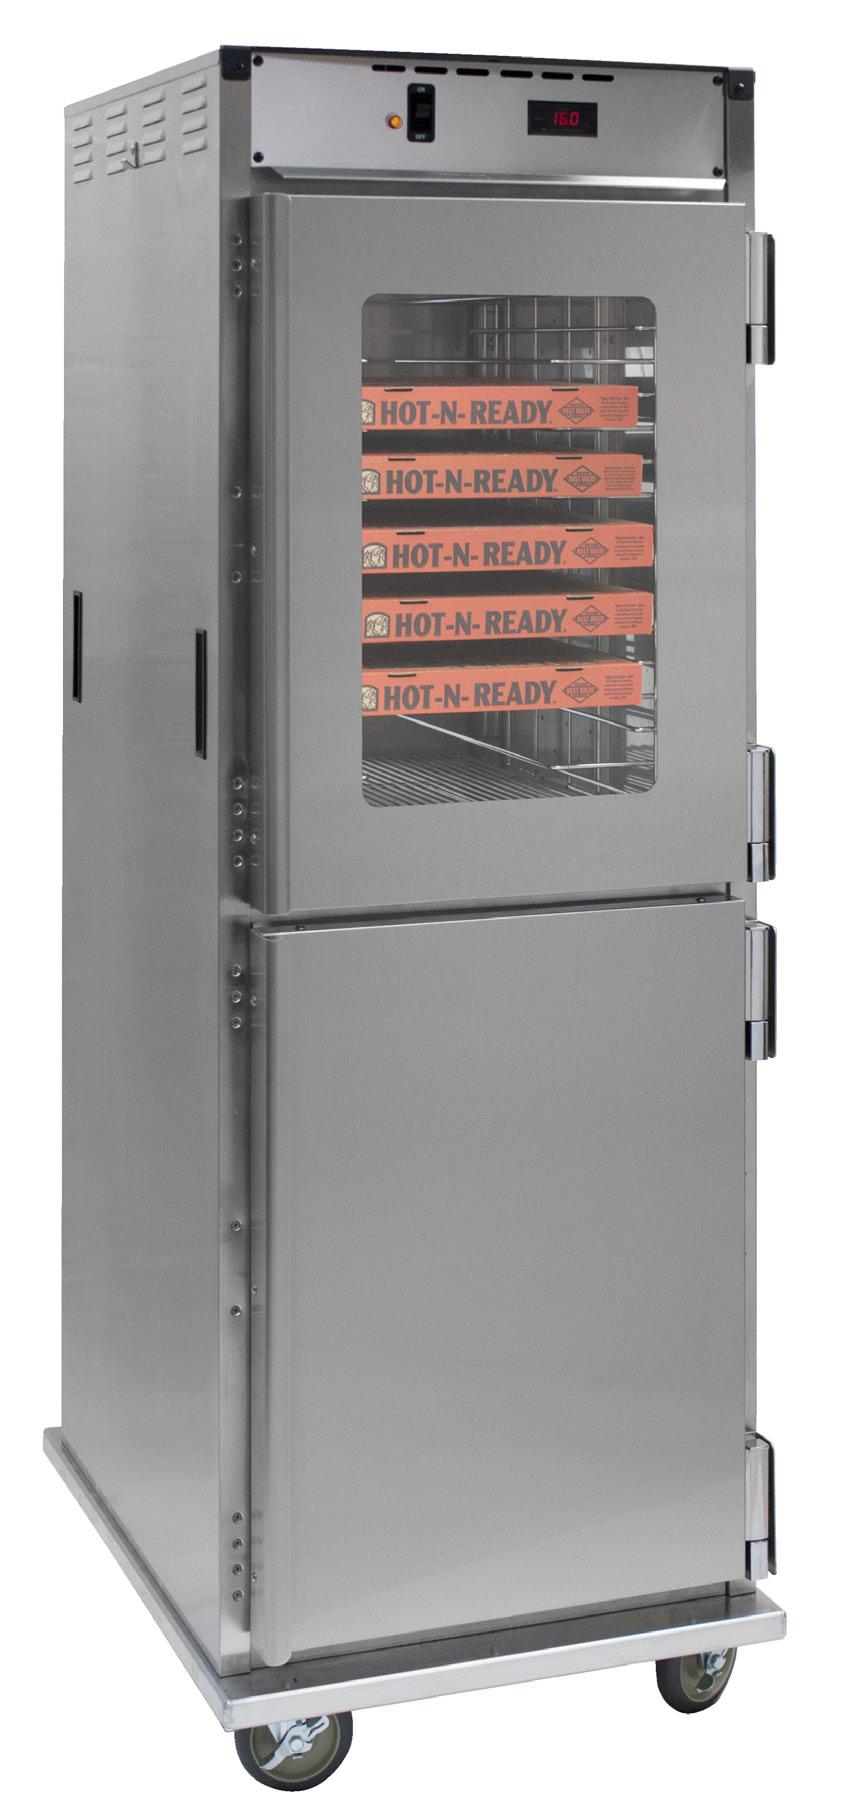 Rev. 0 (/) Page of 9 OPERATING and MAINTENANCE INSTRUCTIONS Models: HNPS6CLCMQRL i7 Hot Cabinet Cabinet